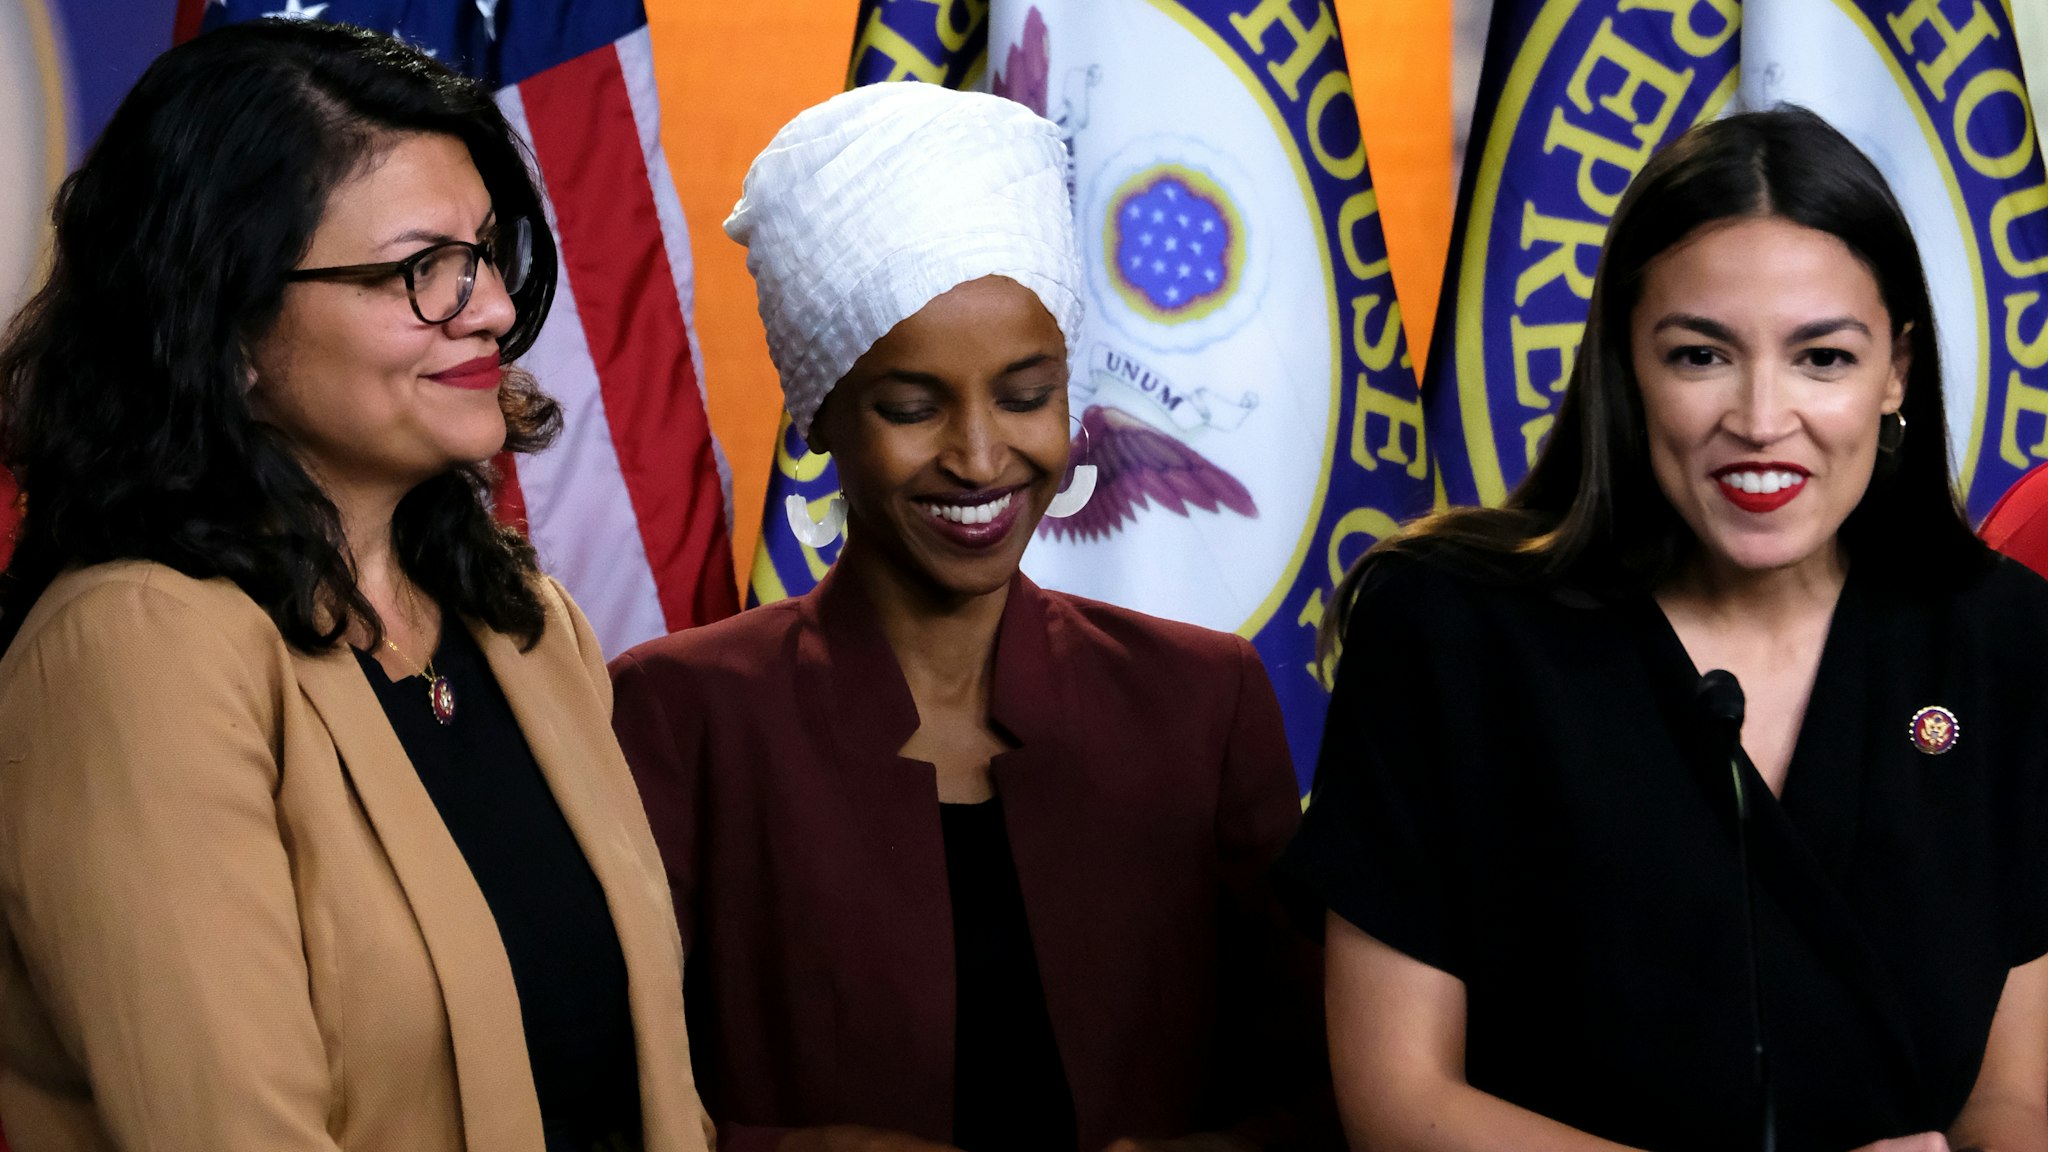 U.S. Reps. Rashida Tlaib (D-MI), Ilhan Omar (D-MN) and Alexandria Ocasio-Cortez (D-NY) listen during a news conference at the U.S. Capitol on July 15, 2019 in Washington, DC. President Donald Trump stepped up his attacks on the four progressive Democratic congresswomen, saying that if they're not happy in the U.S. "they can leave."